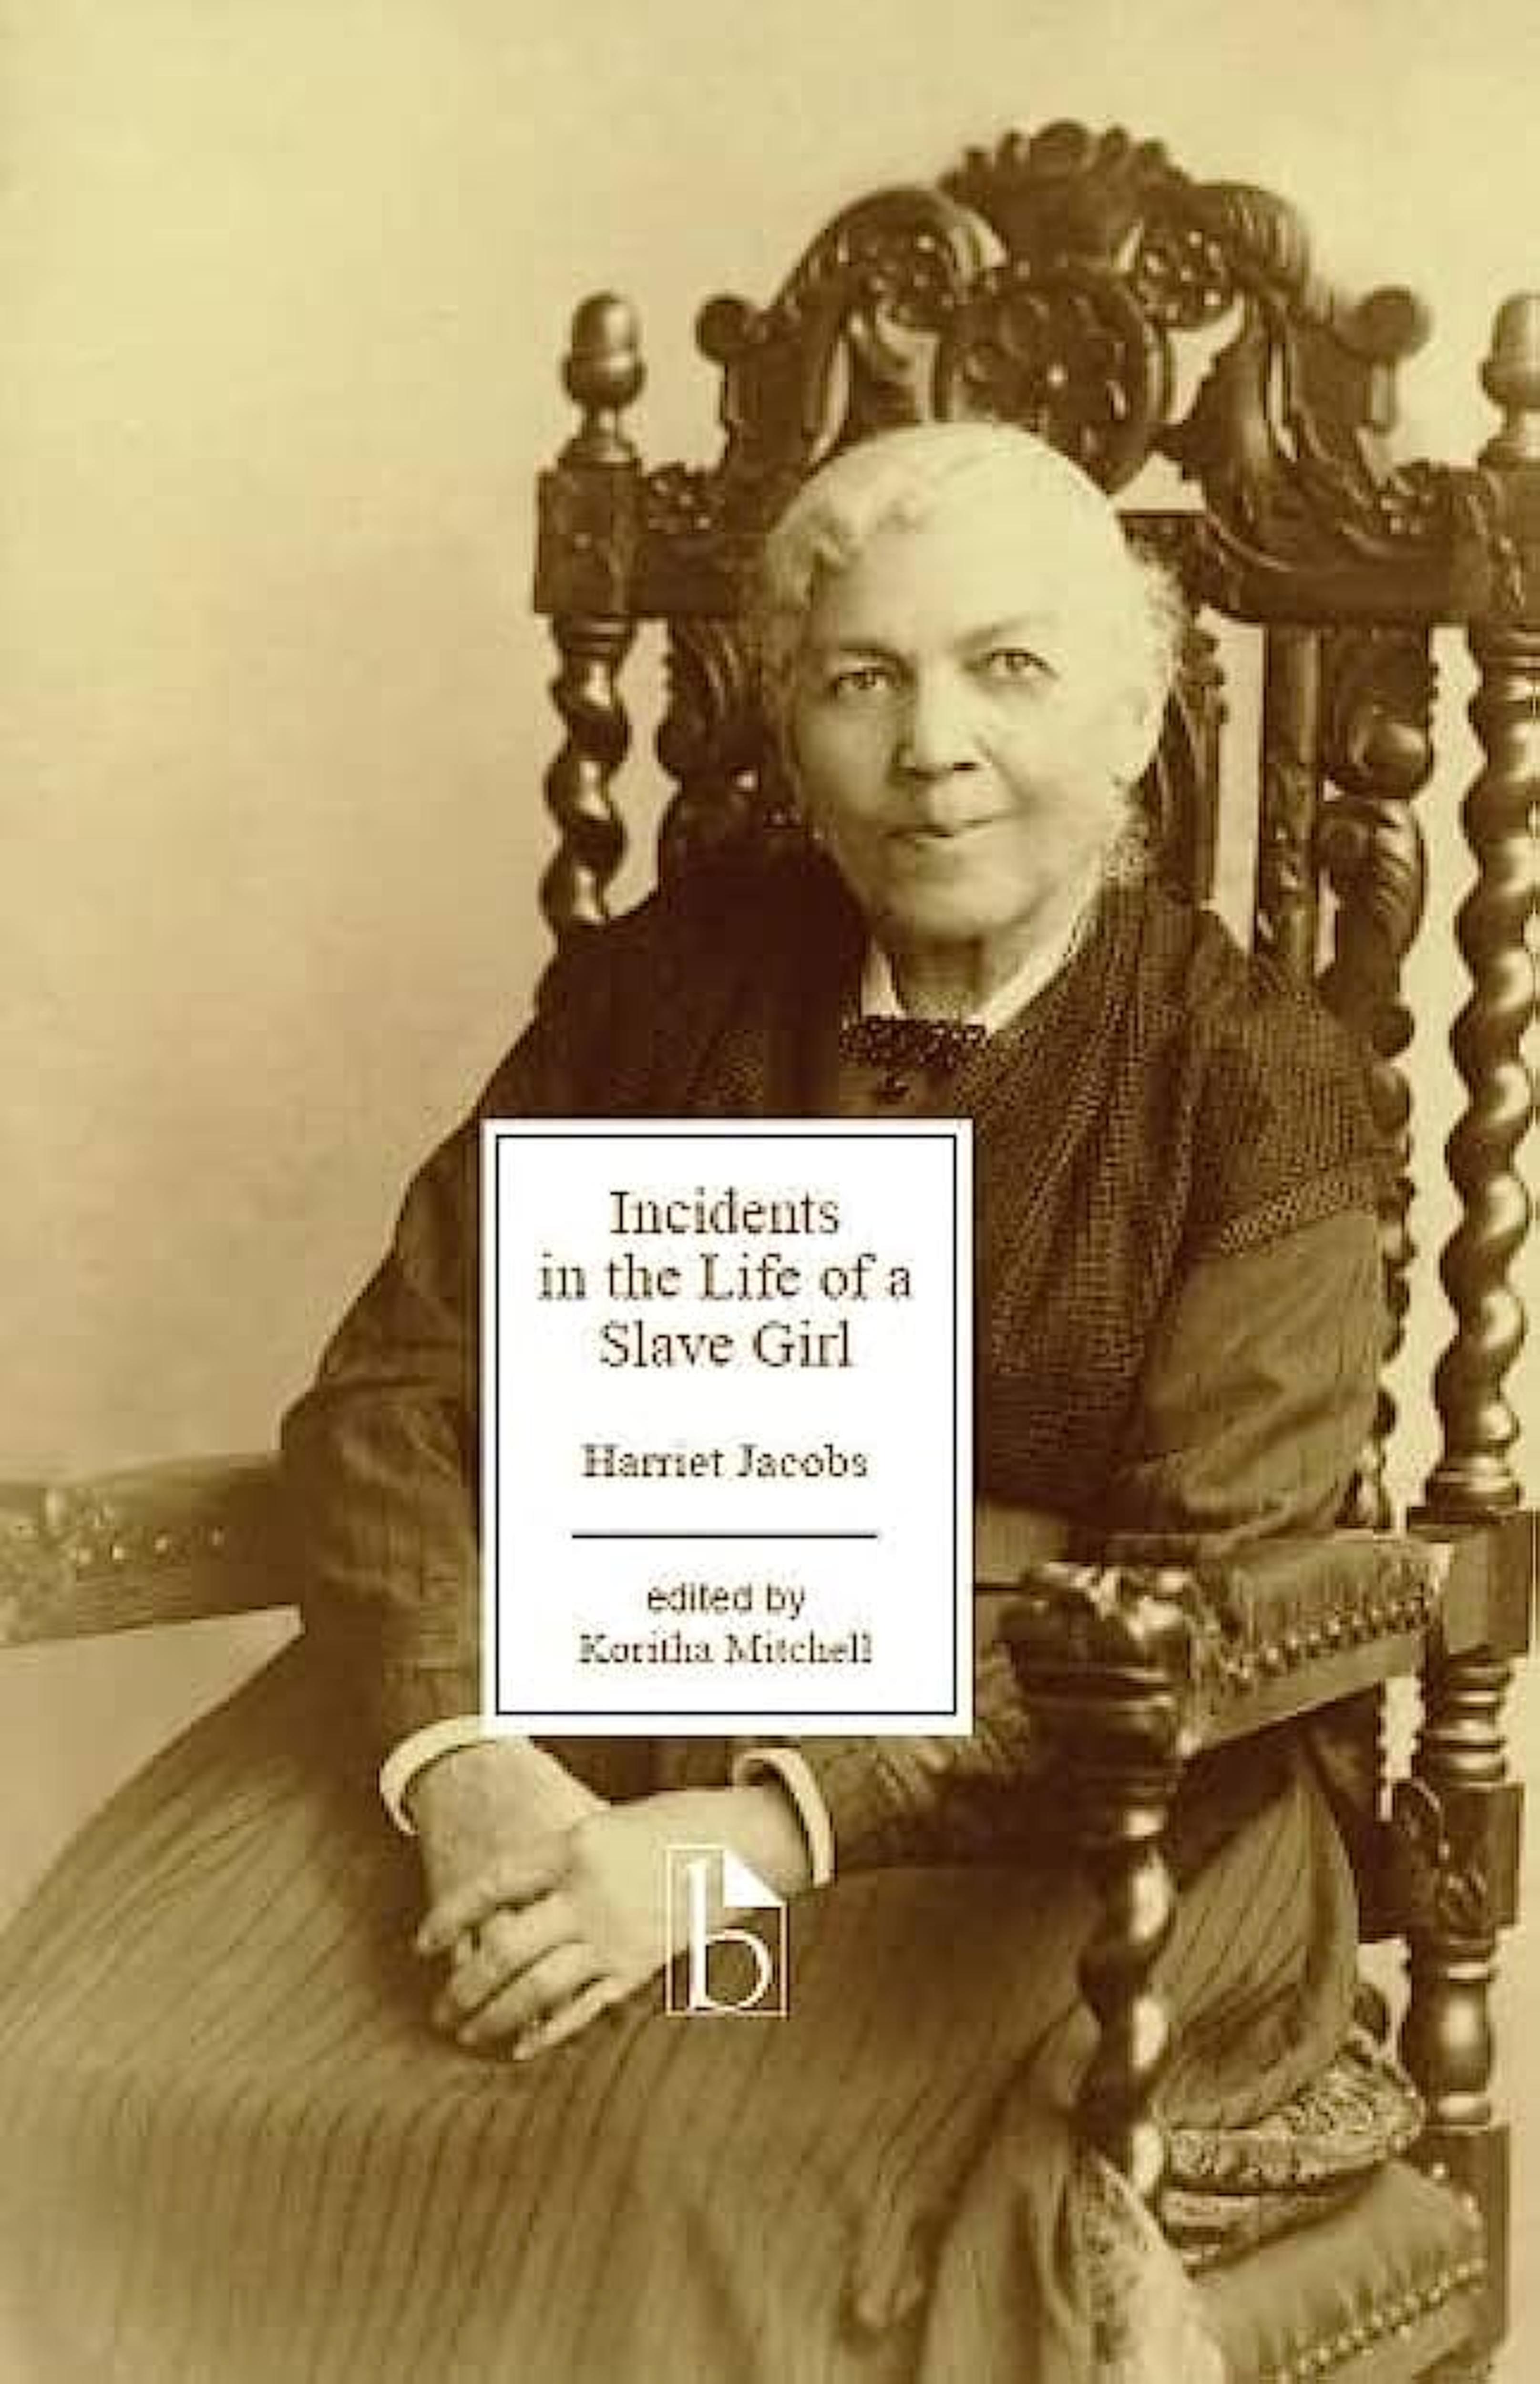 “Incidents in the Life of a Slave Girl” by Harriet Jacobs edited by Koritha Mitchell